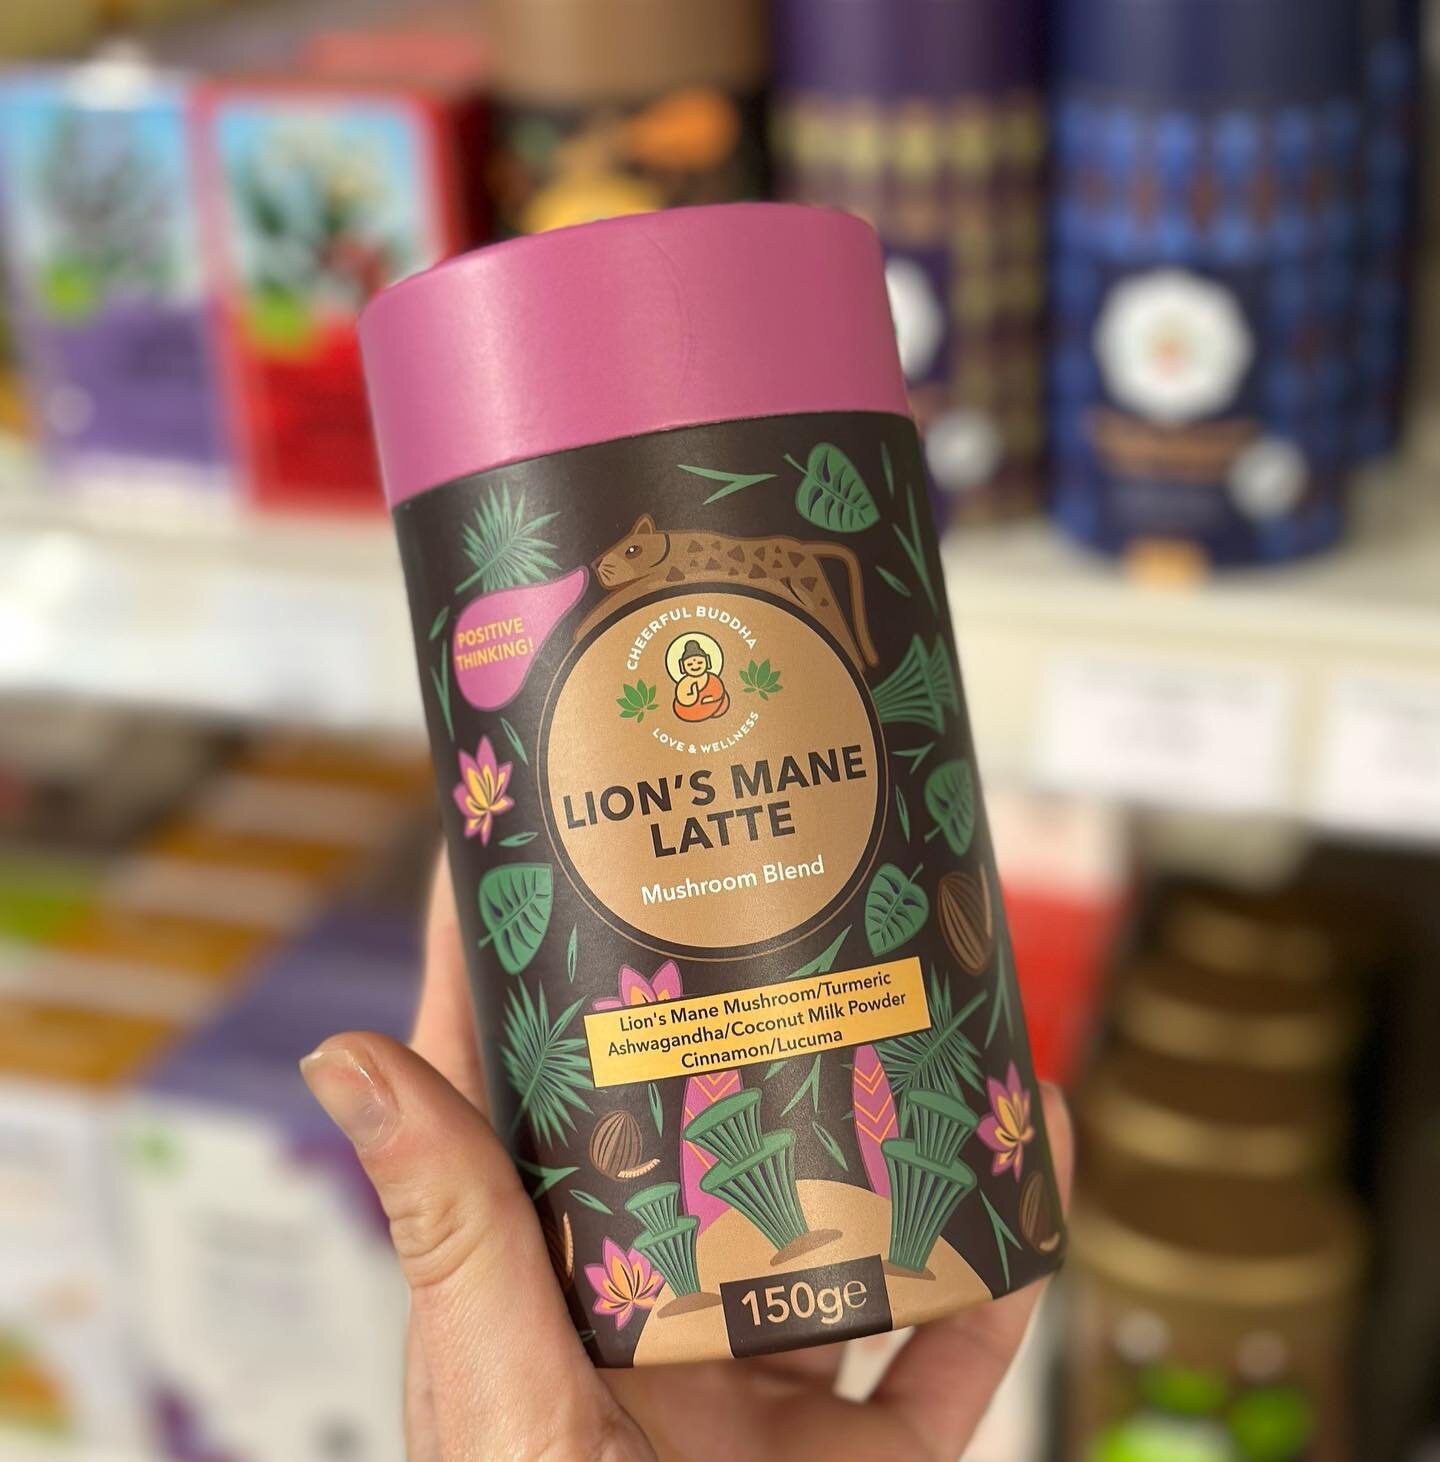 New hot drink &amp; mushroom coffee range! 
Featuring power ingredients such as lions mane mushroom, chaga, reishi, cacao and ashwaganda&hellip;

Which will you choose to start your day right? 🍄💪🏼

#lionsmane #reishi #mushroomcoffee #vegan #shoplo